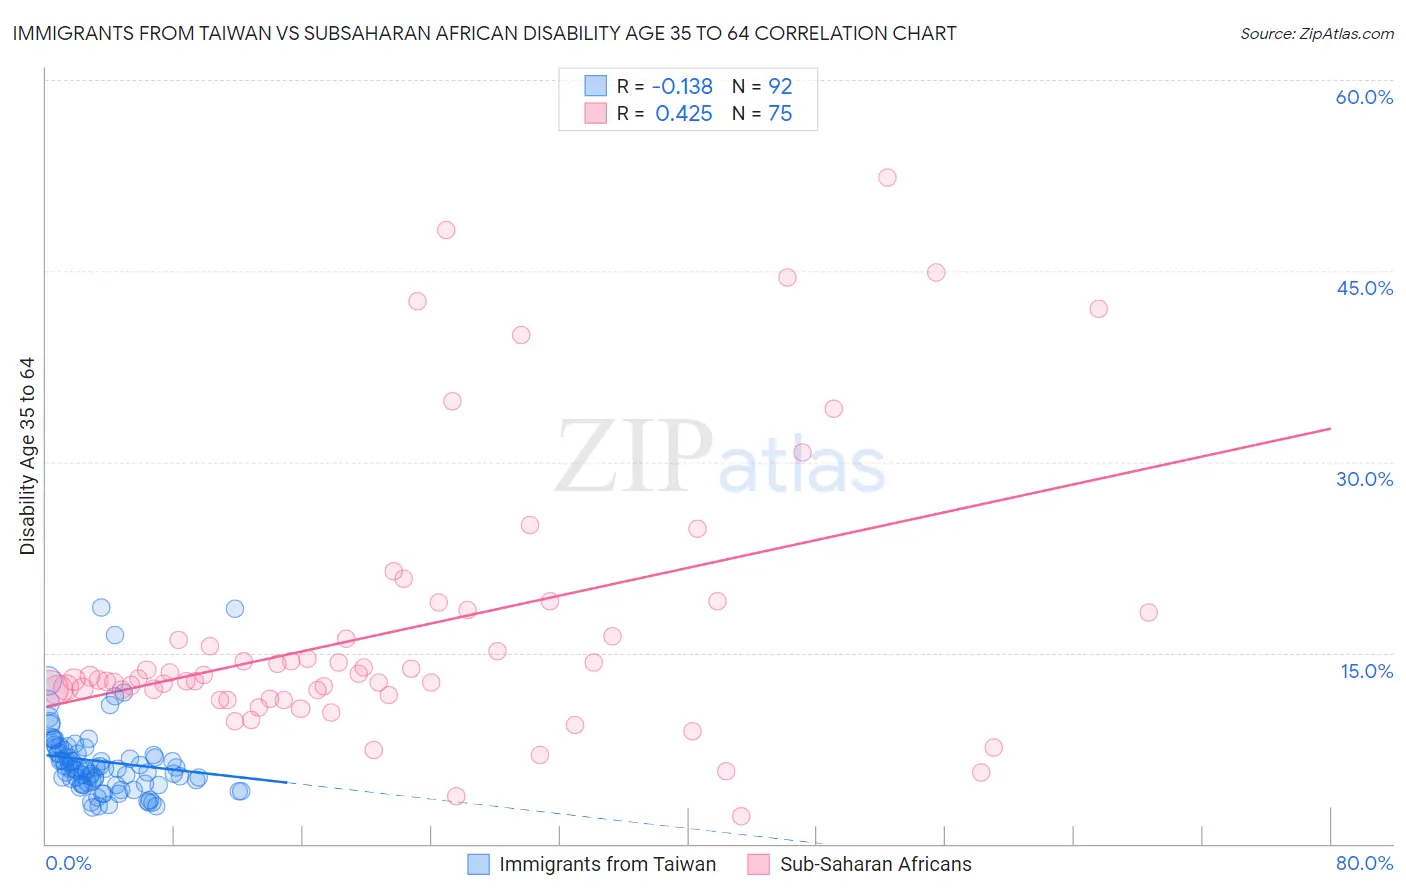 Immigrants from Taiwan vs Subsaharan African Disability Age 35 to 64